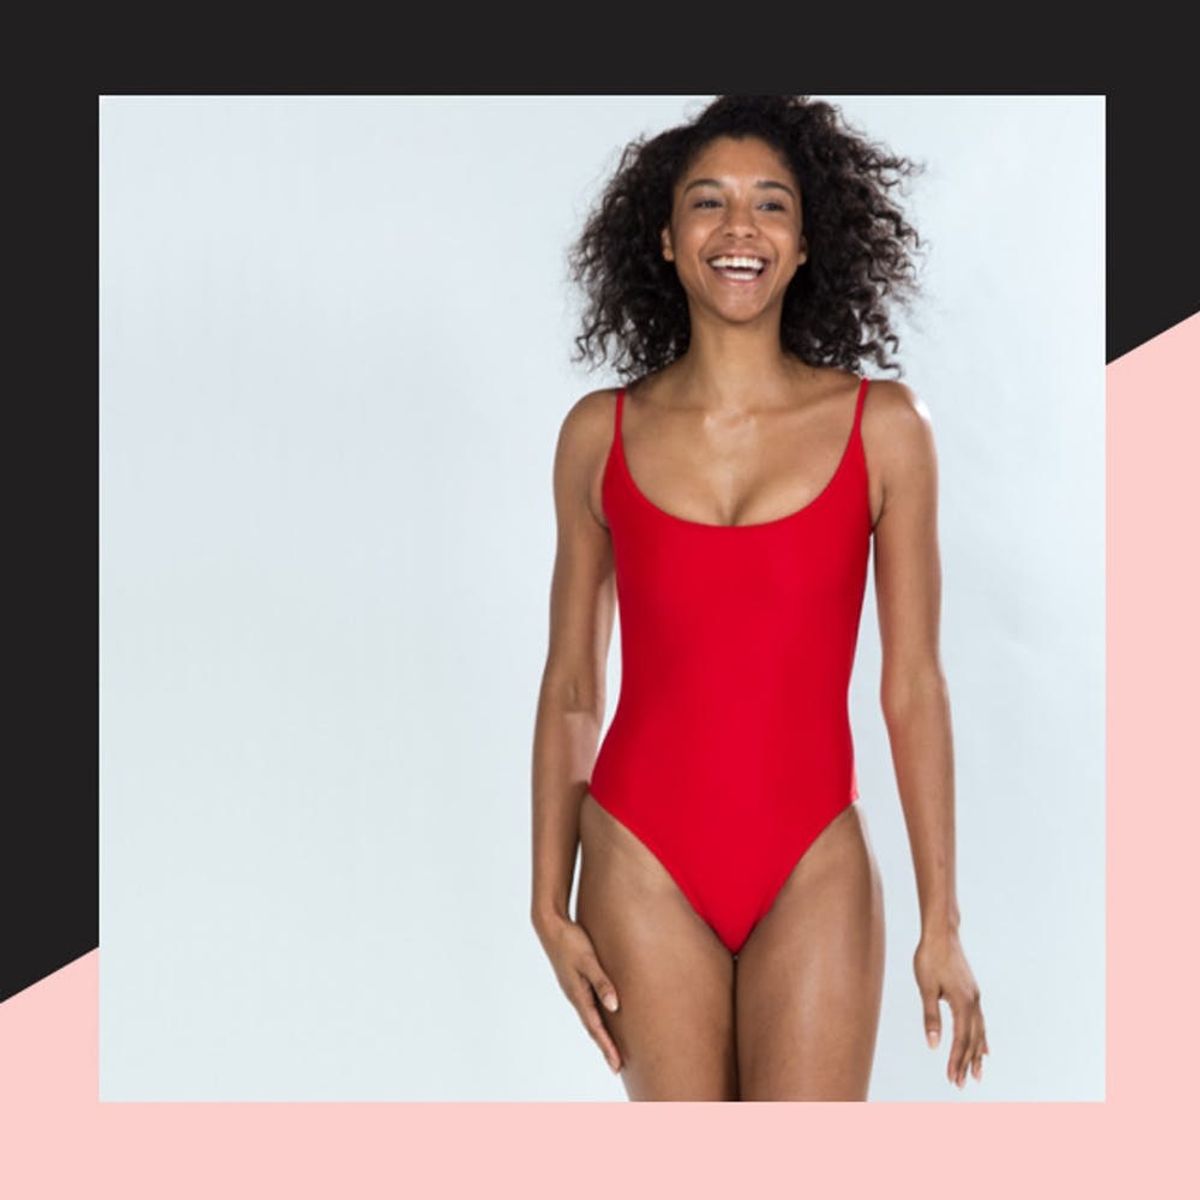 13 Baywatch-Inspired Swimsuits to Rock This Summer